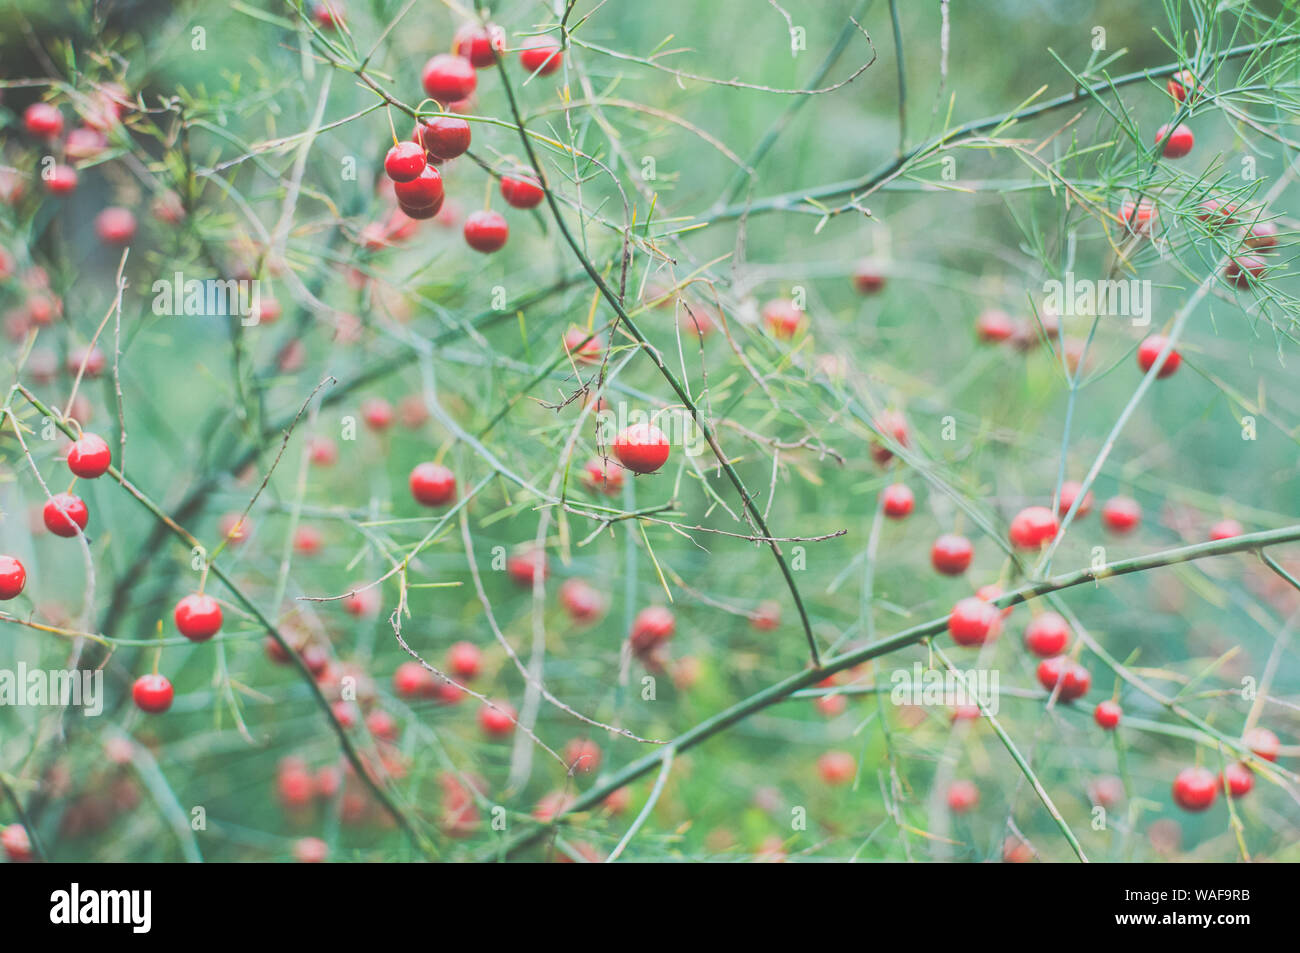 Garden Asparagus (Asparagus officinalis) plant with red berries and green pin leaves. Stock Photo